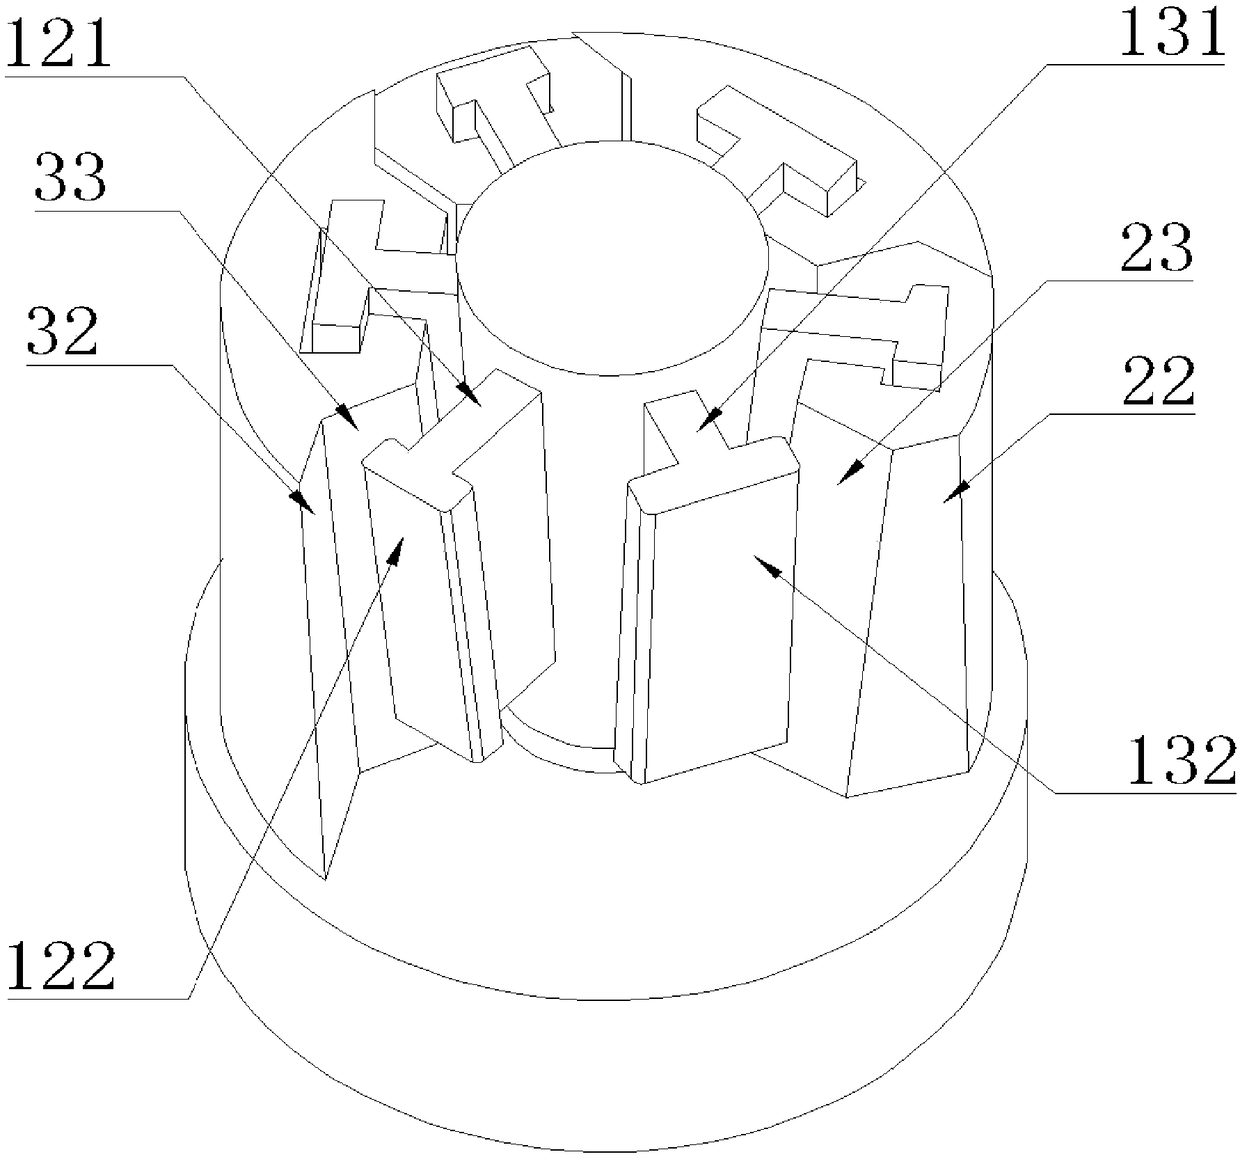 Inner core mold with contraction function